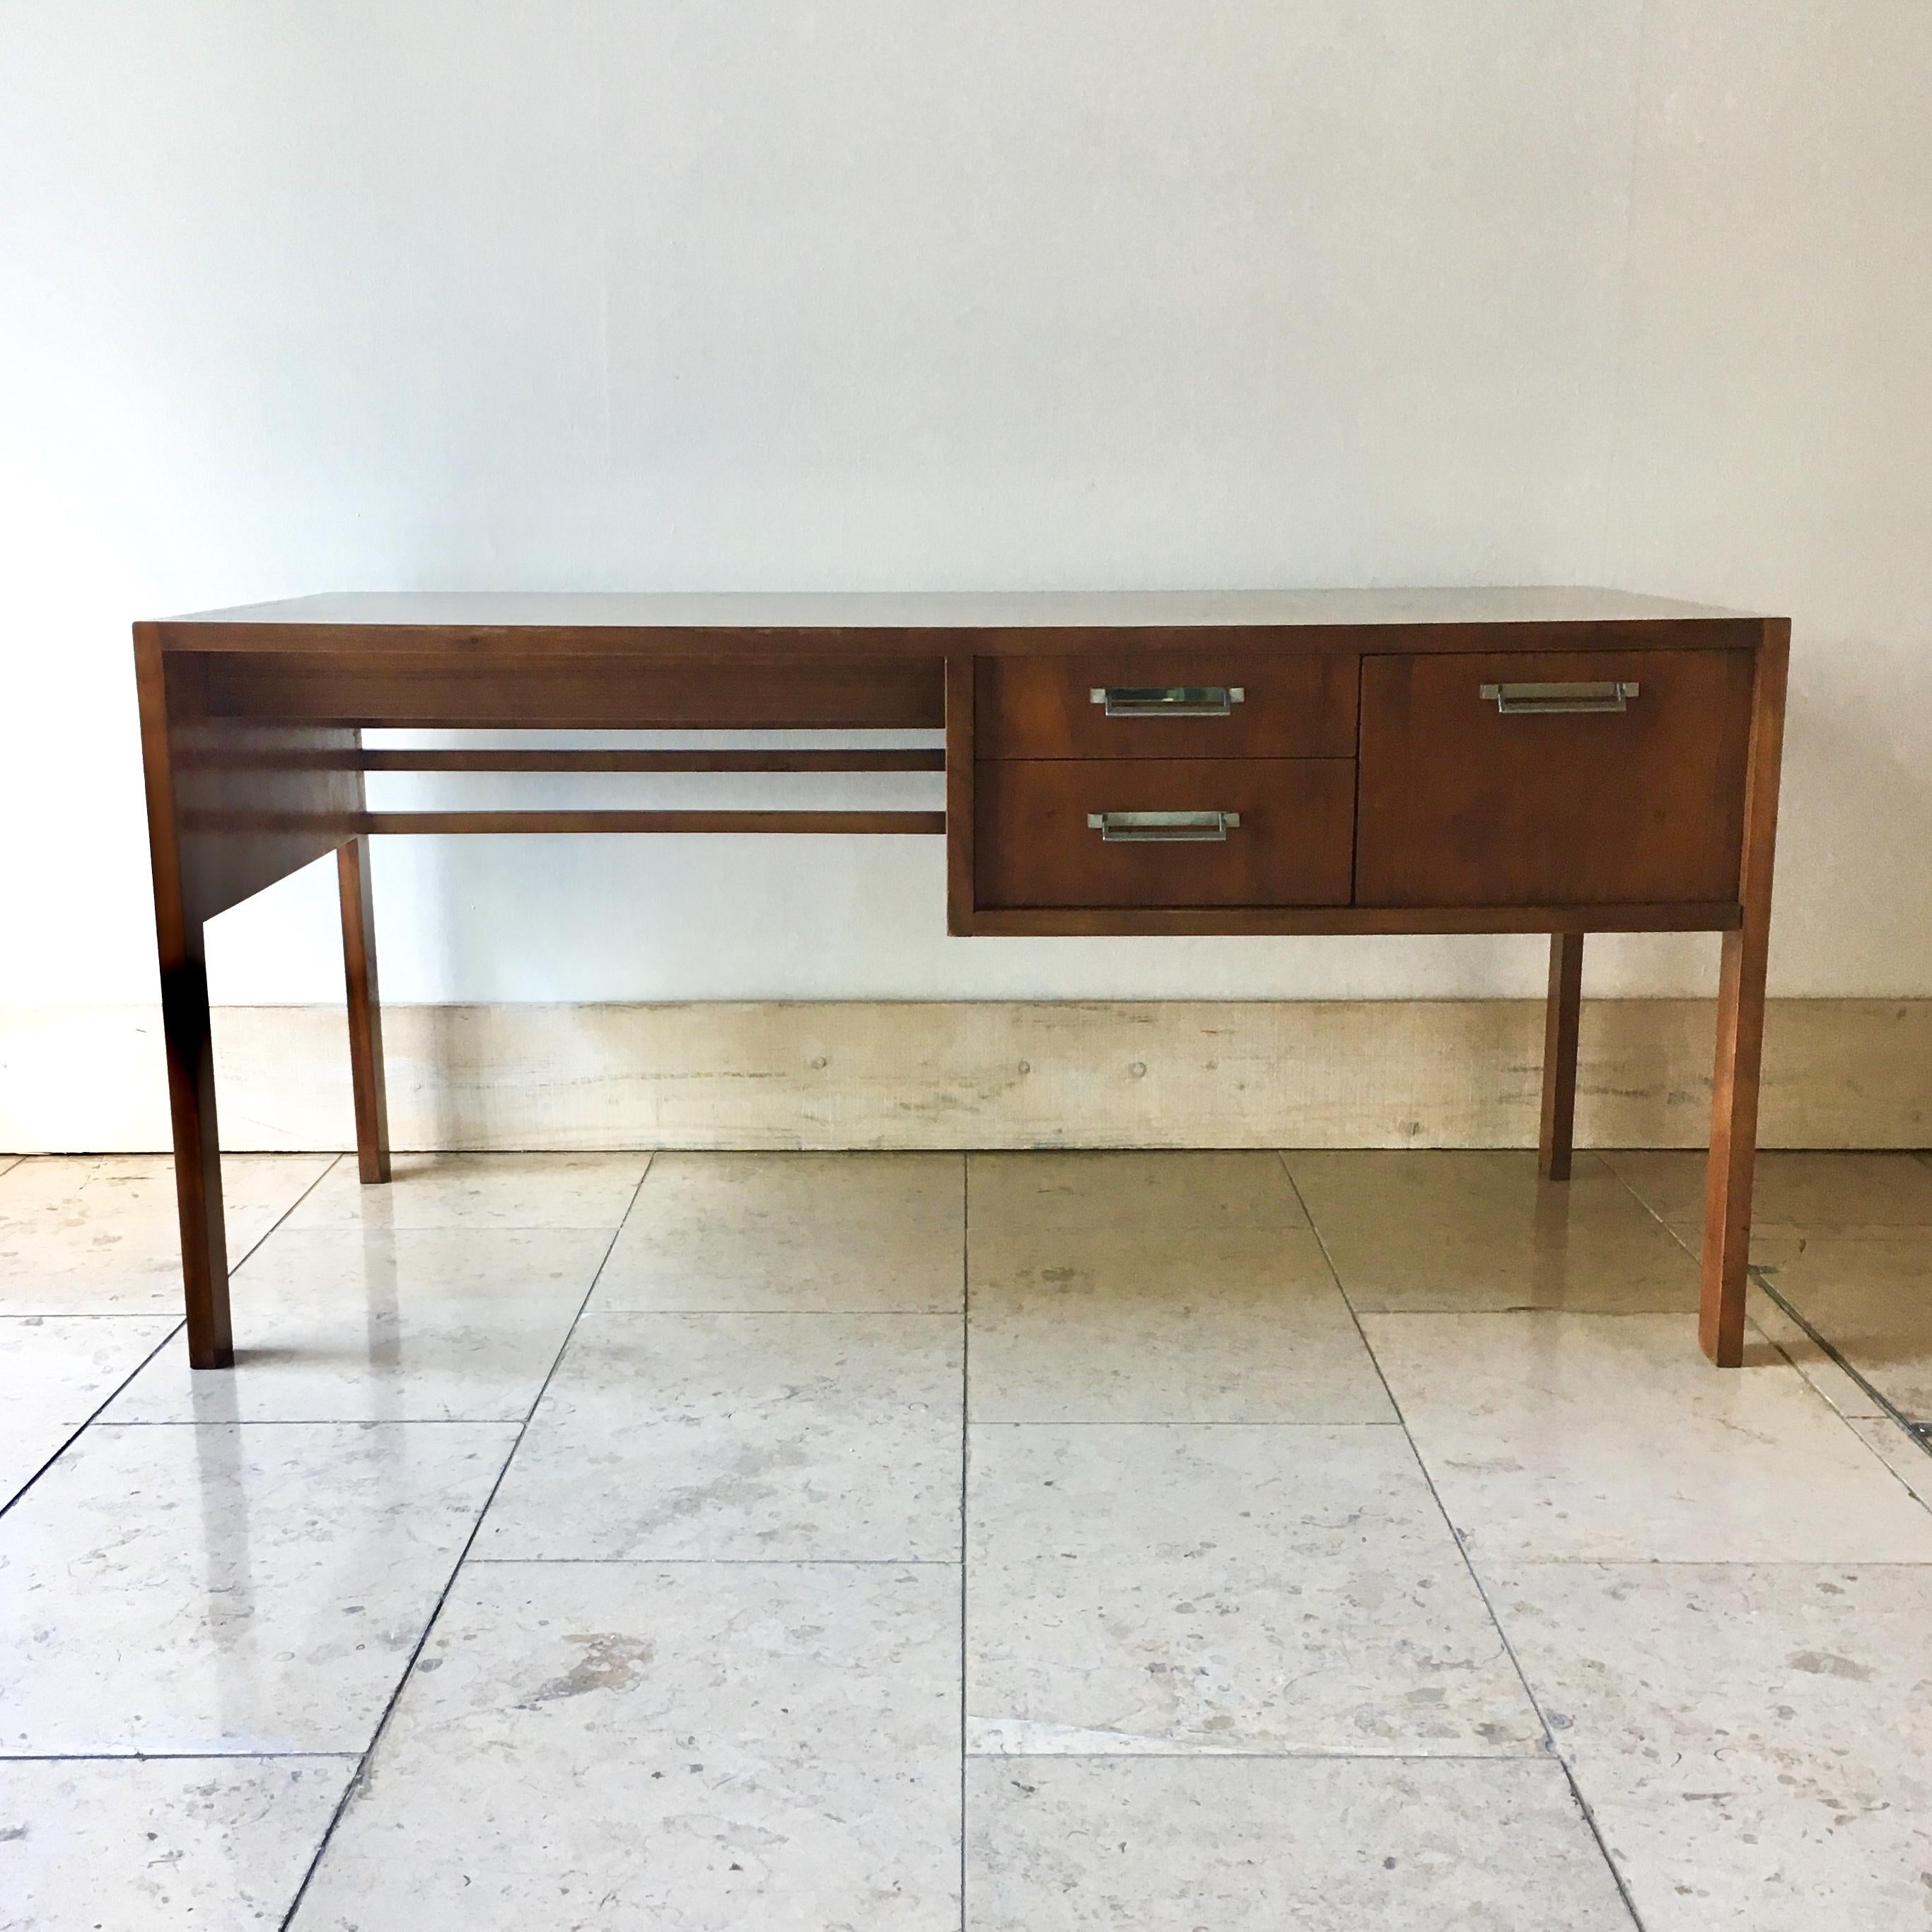 Elegant slim proportioned walnut desk by Baker with nickel handles, stamped interior of drawer with makers mark
Far right hand drawer has angled dividers, all three drawers run smoothly, 1960s.

 Baker was a family business founded by Siebe Baker.